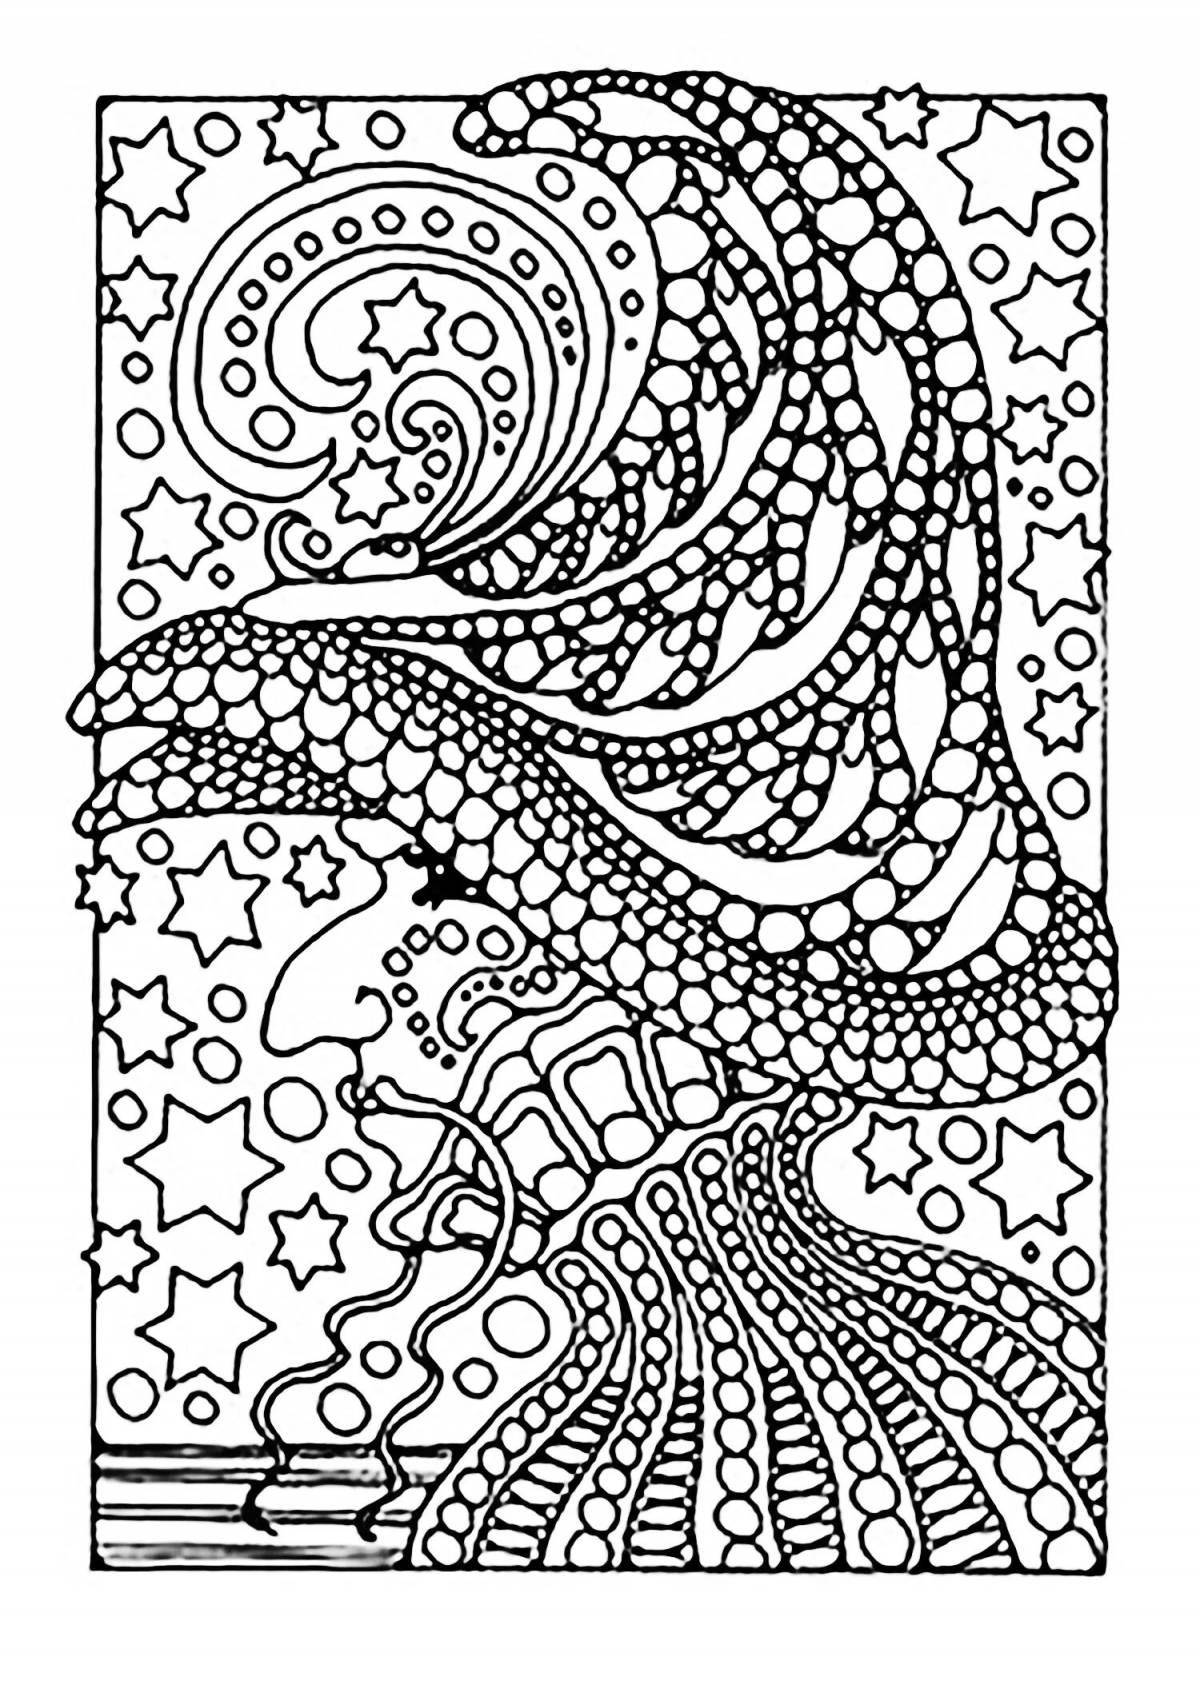 Smooth nerves coloring page